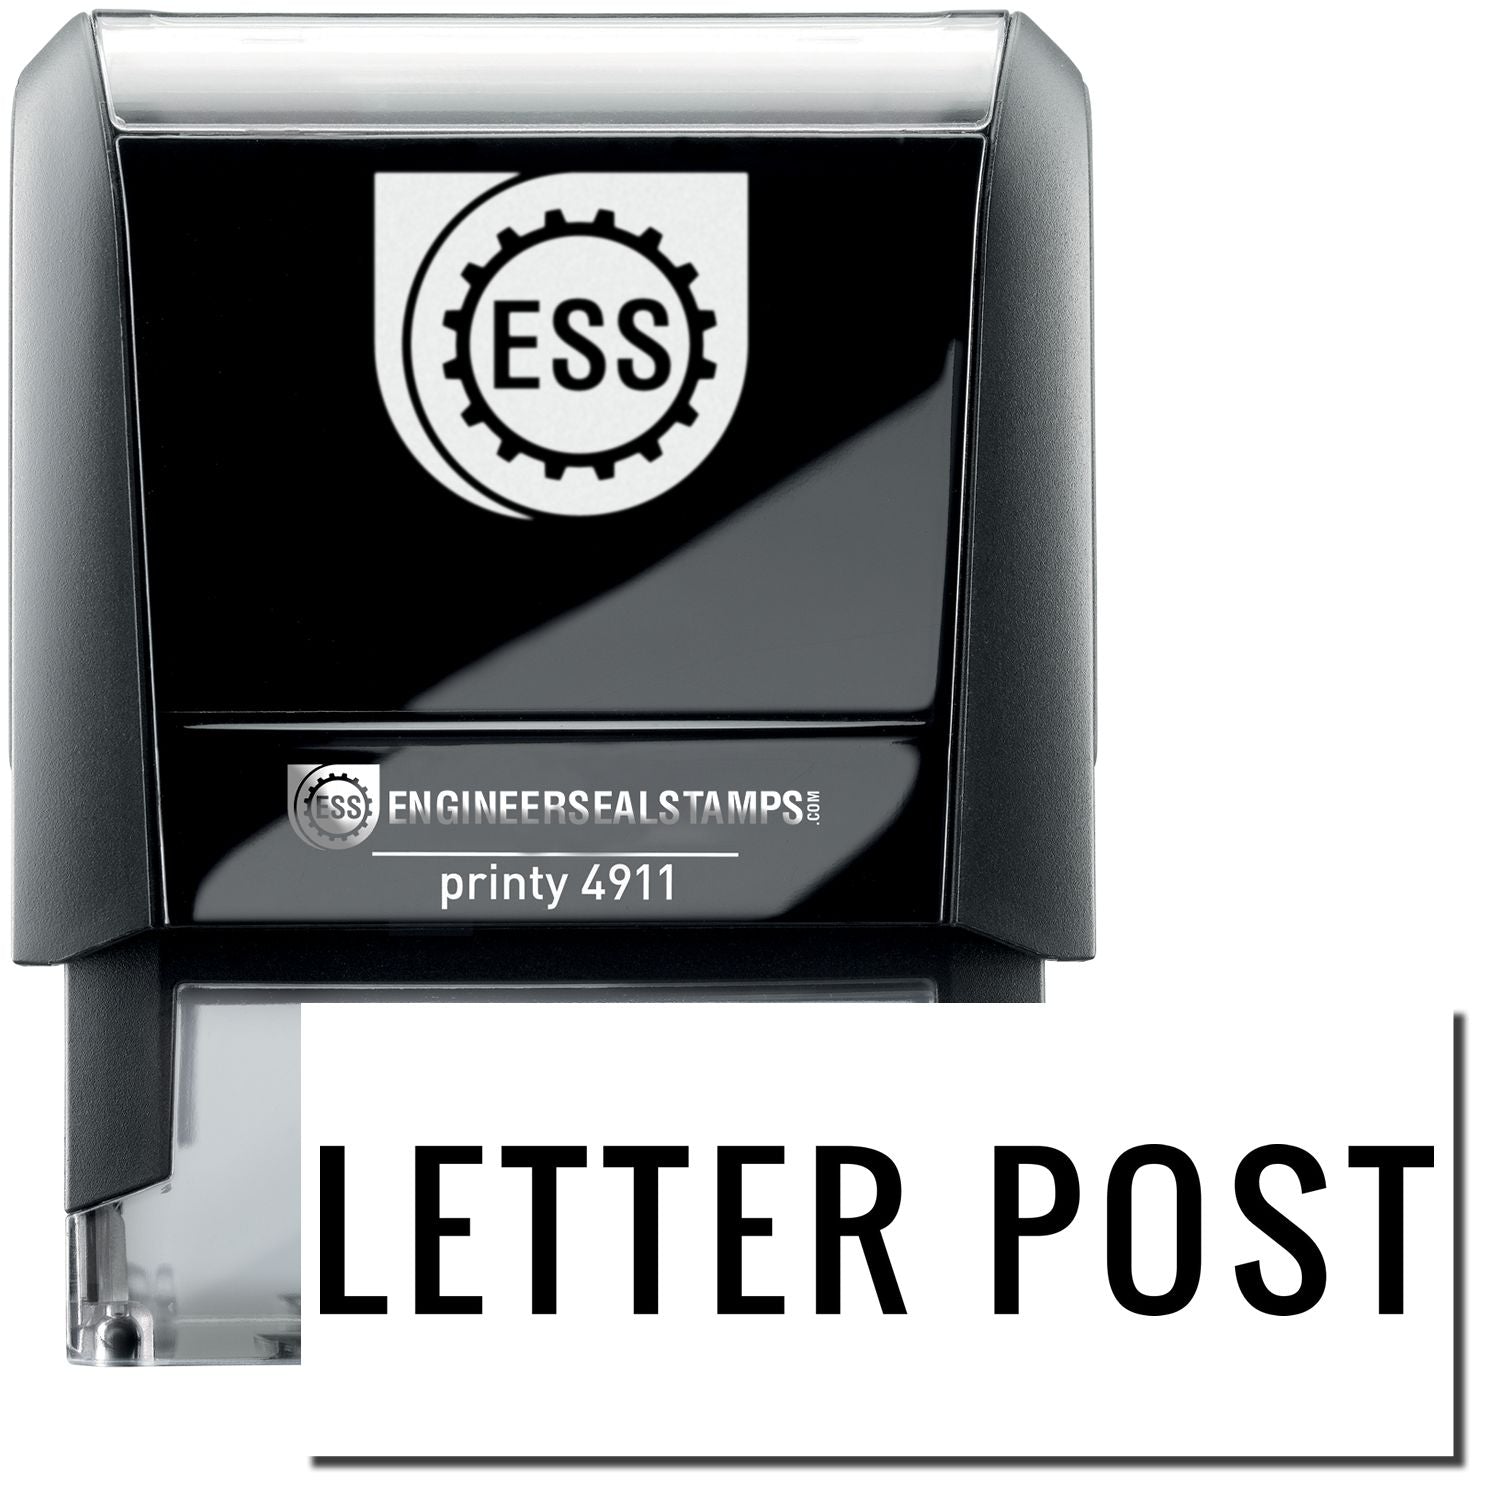 A self-inking stamp with a stamped image showing how the text "LETTER POST" is displayed after stamping.